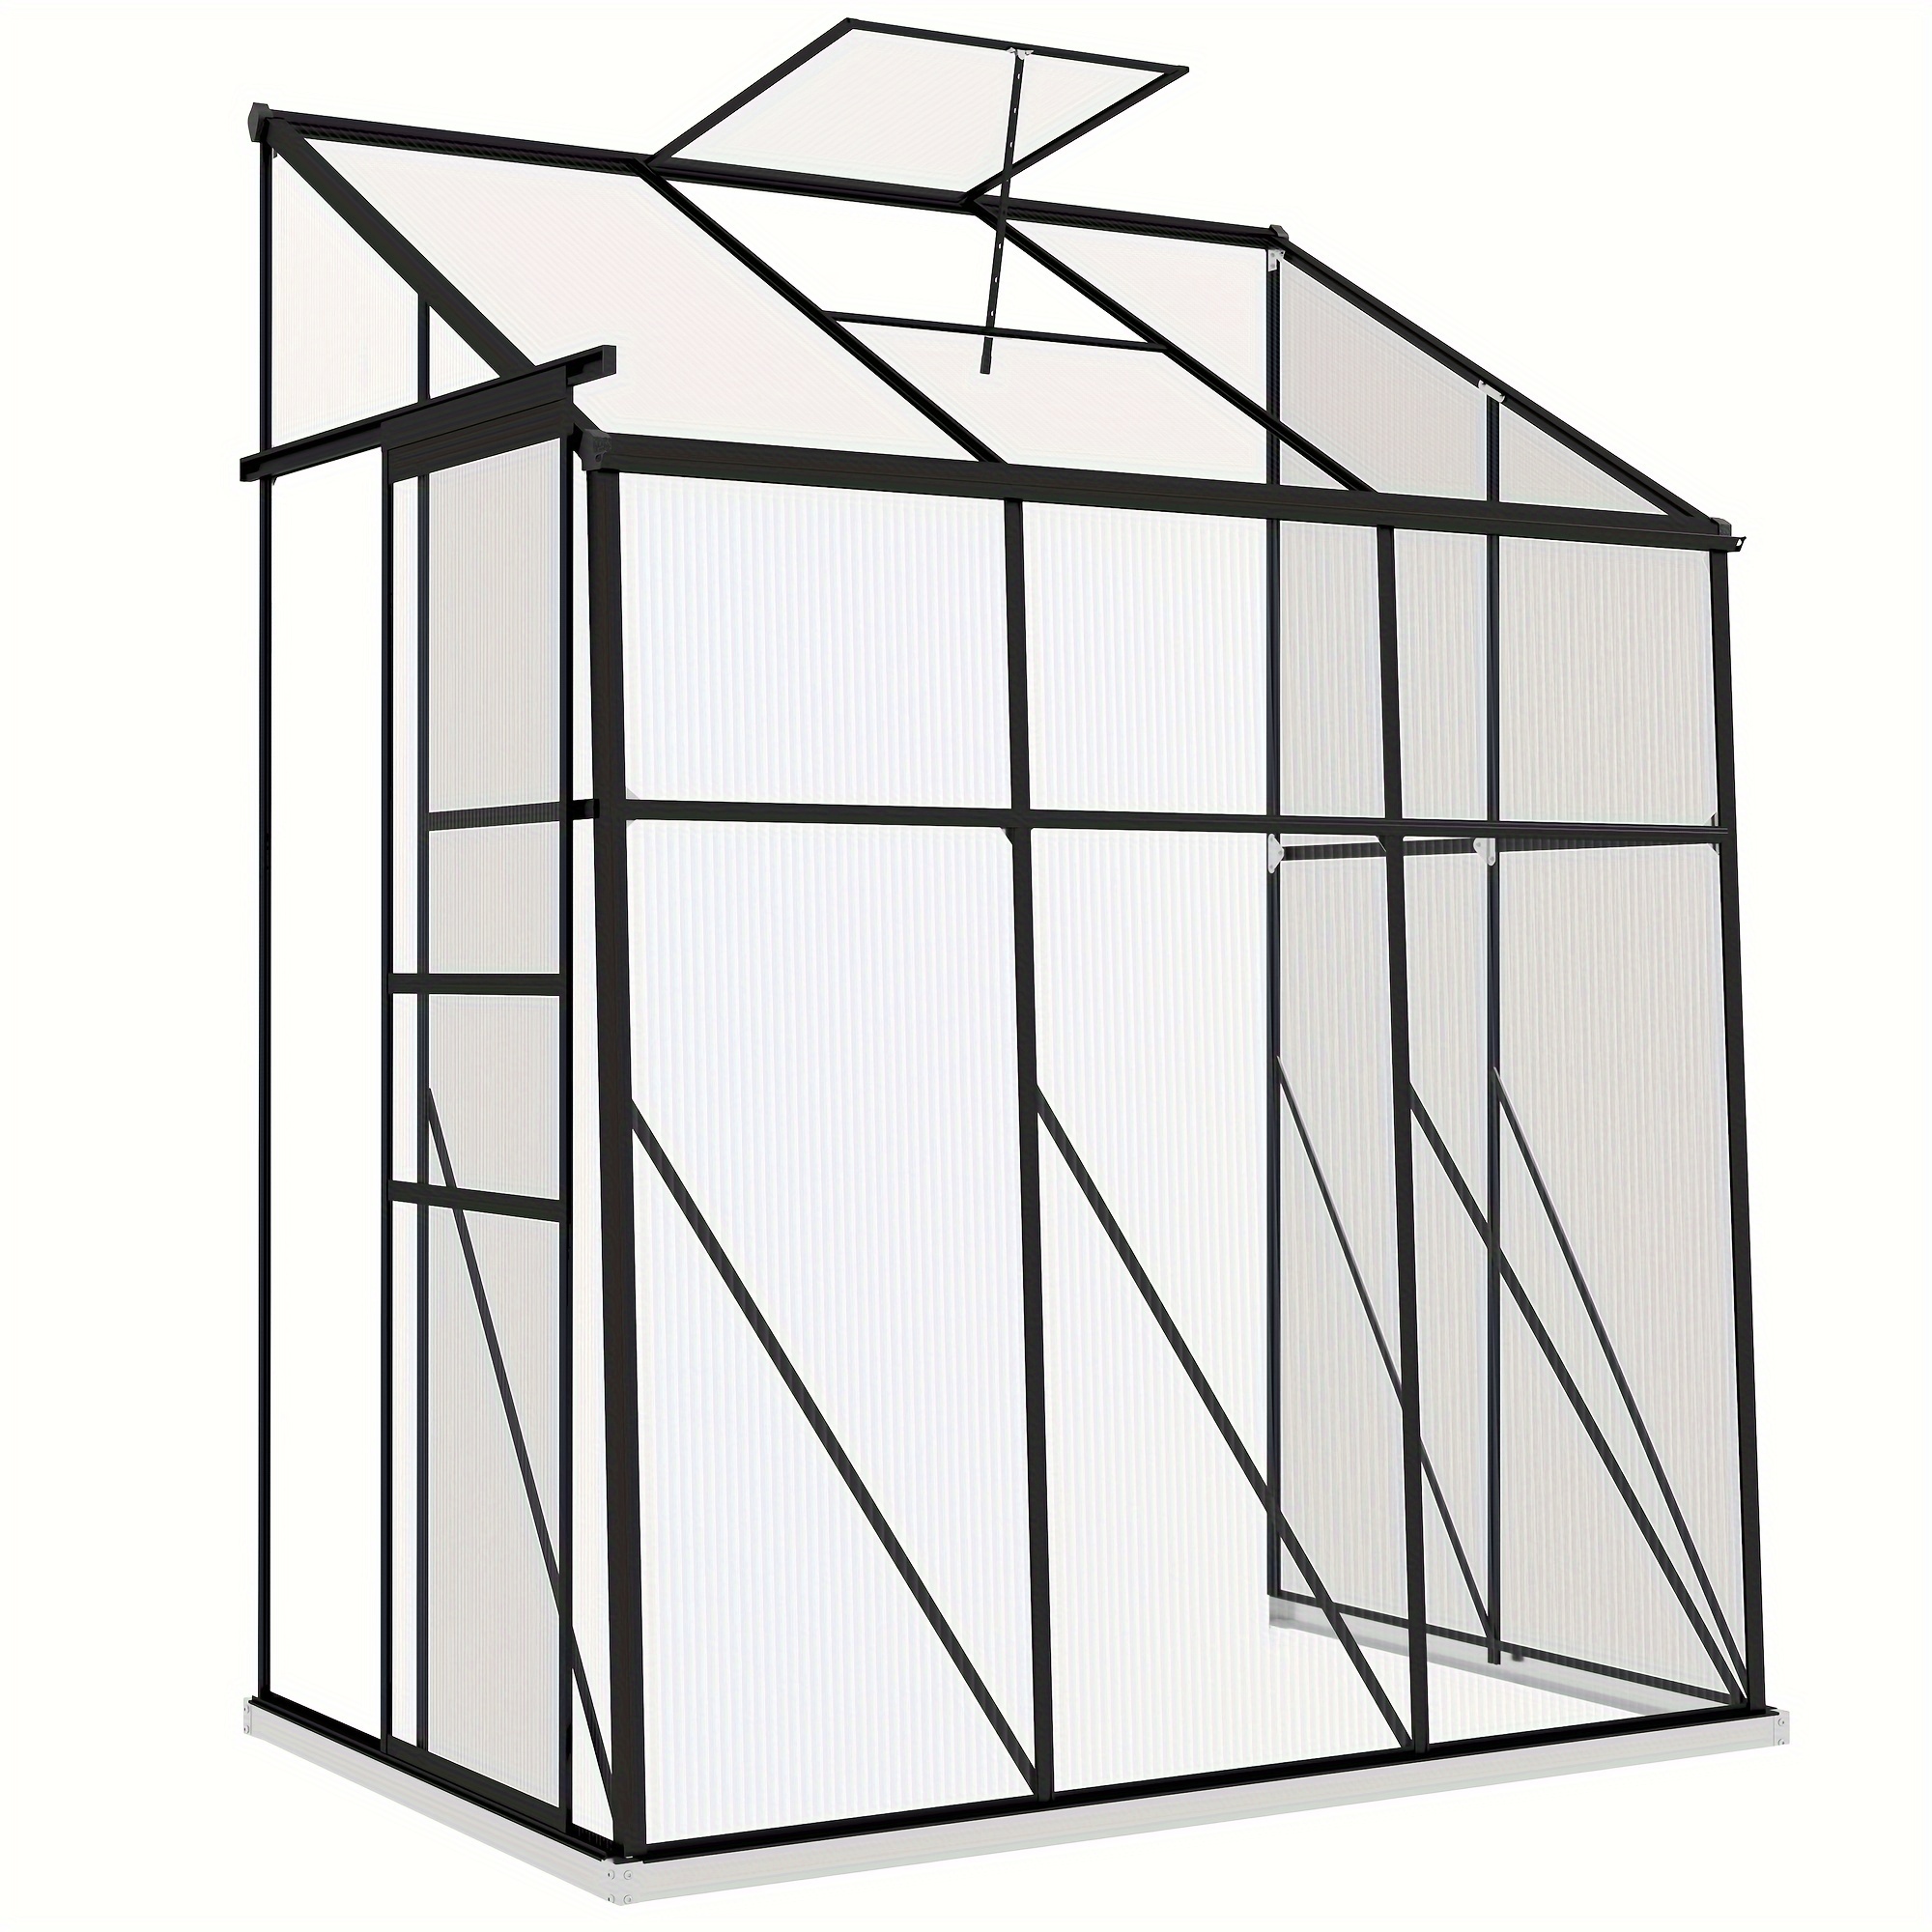 

Outsunny 6' X 4' Lean-to Polycarbonate Greenhouse, Walk-in Hobby Green House With Sliding Door, 5-level Roof Vent, Rain Gutter, Garden Plant Hot House With Aluminum Frame And Foundation, Black